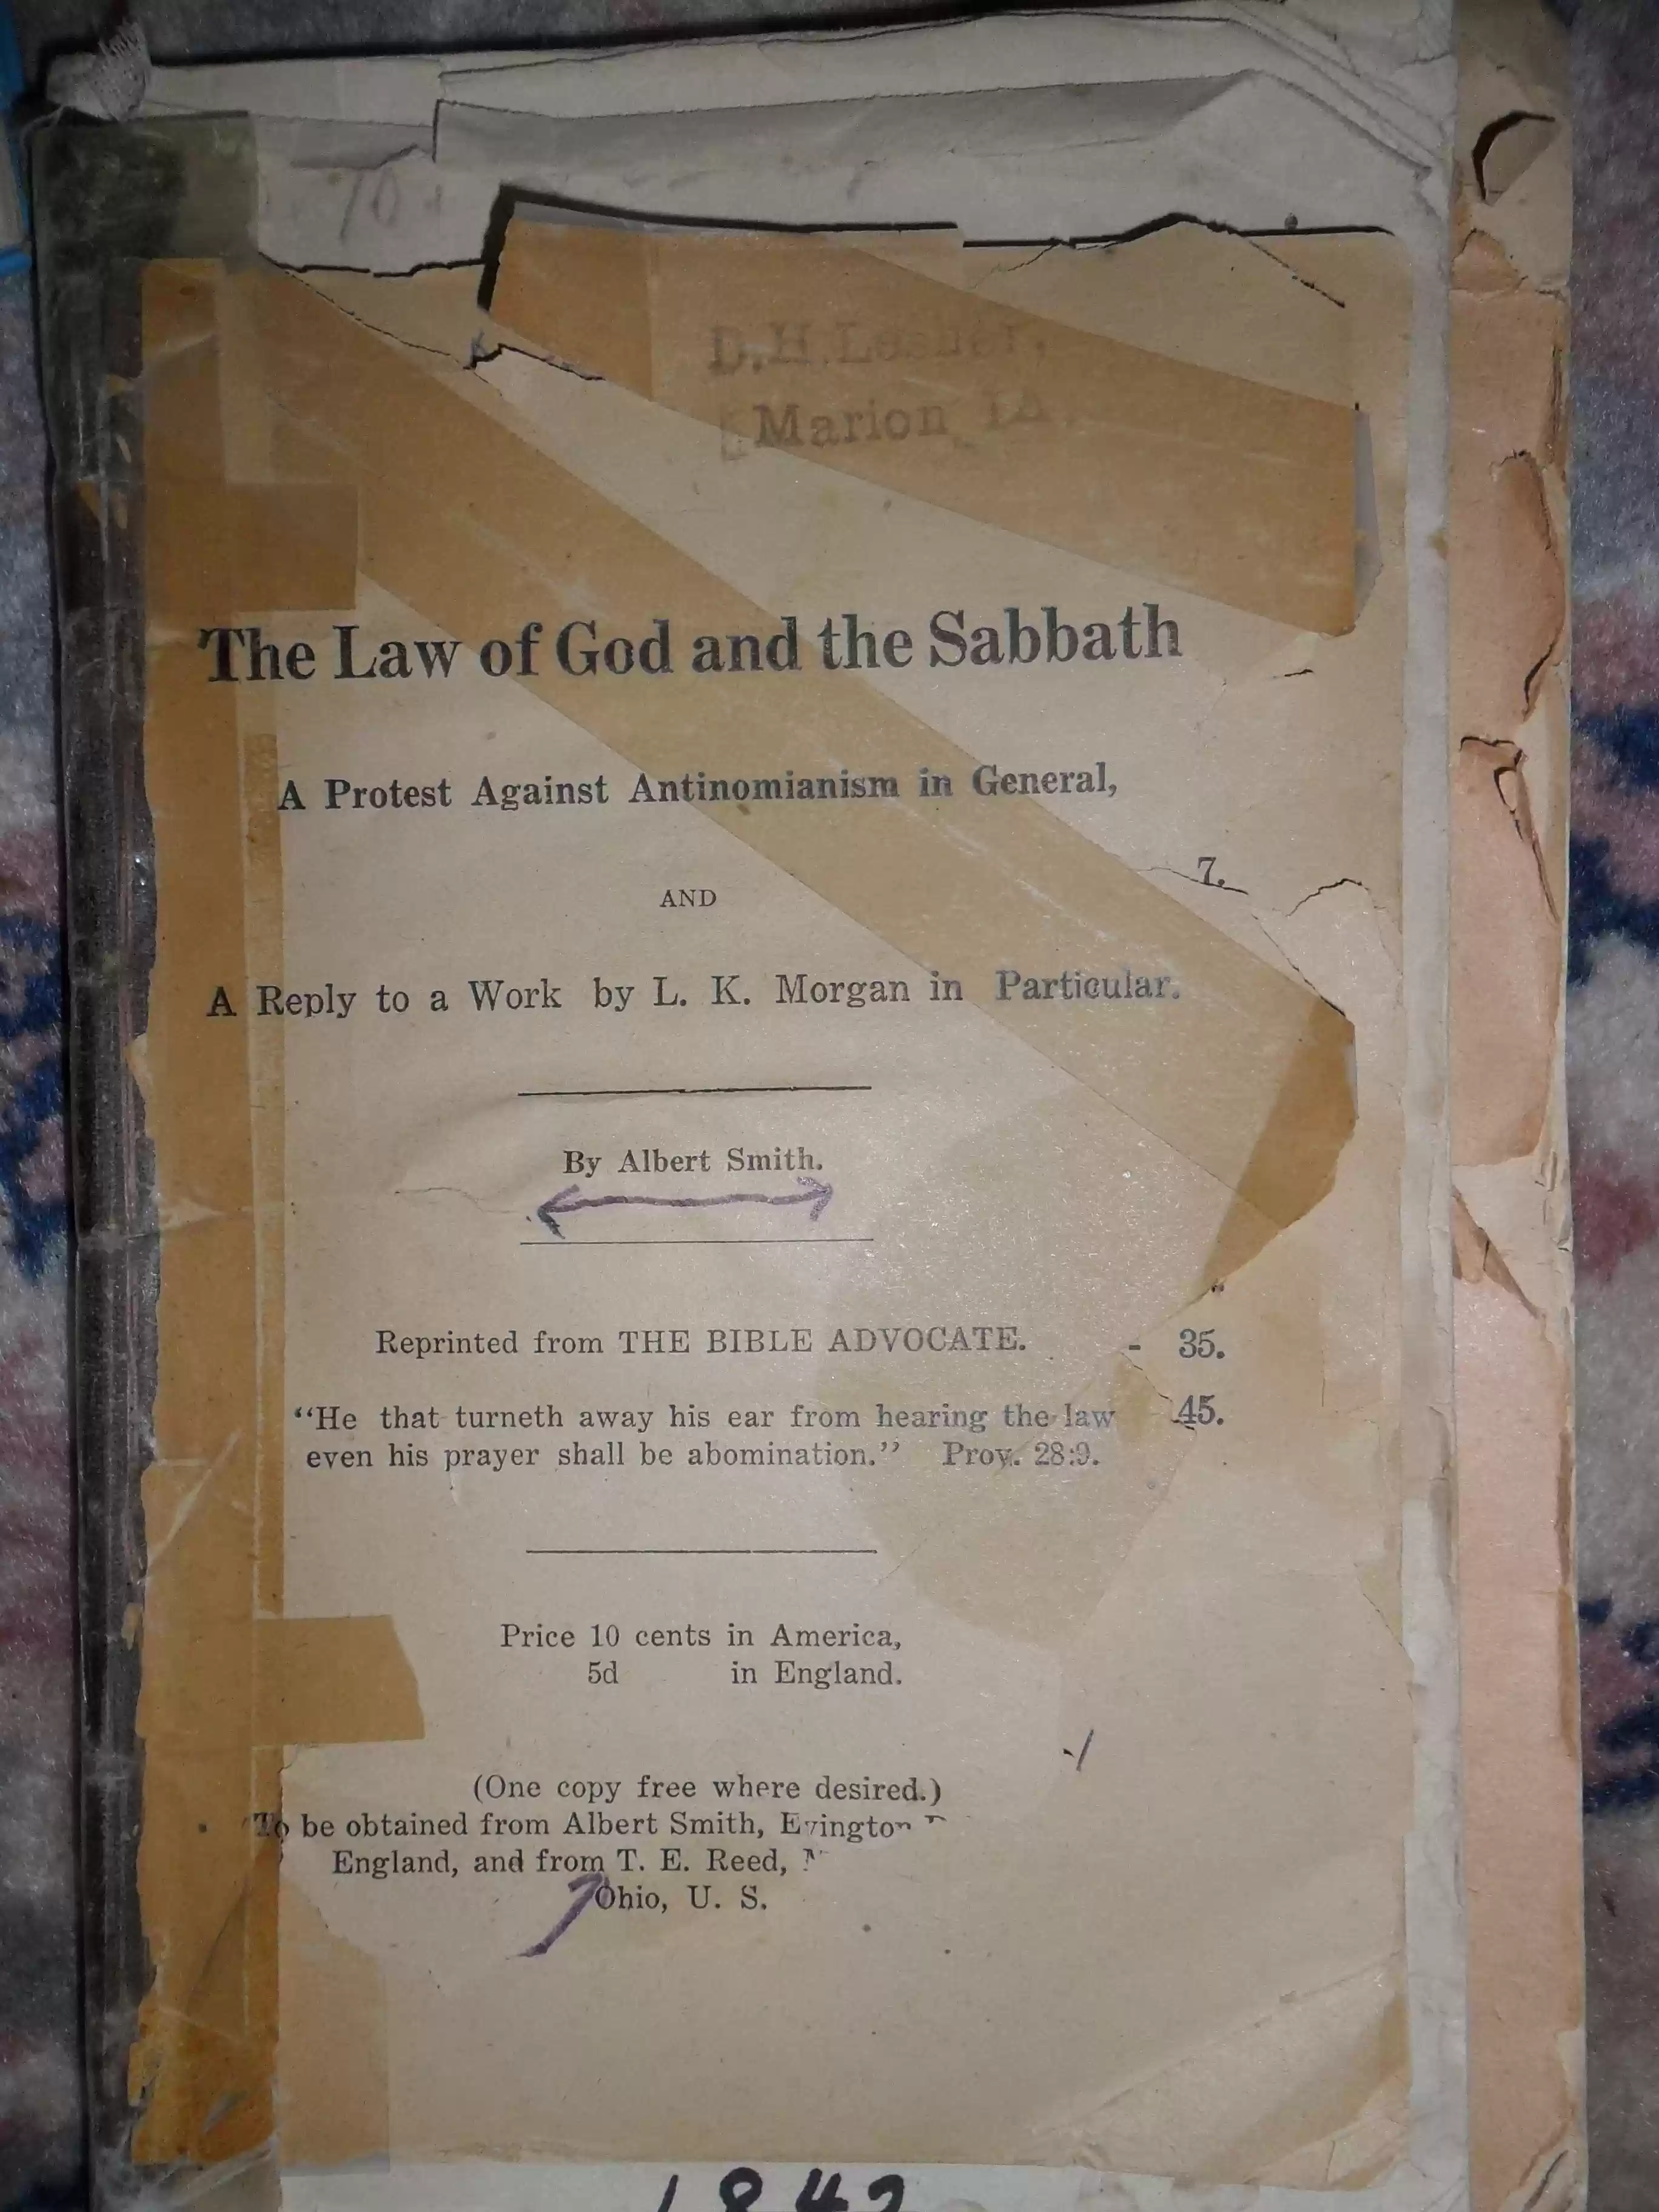 SAM_0516-The Law of God and the Sabbath by Albert Smith. He was a well-known Church of God (Seventh Day) pastorpreacherwritter from England in the 192